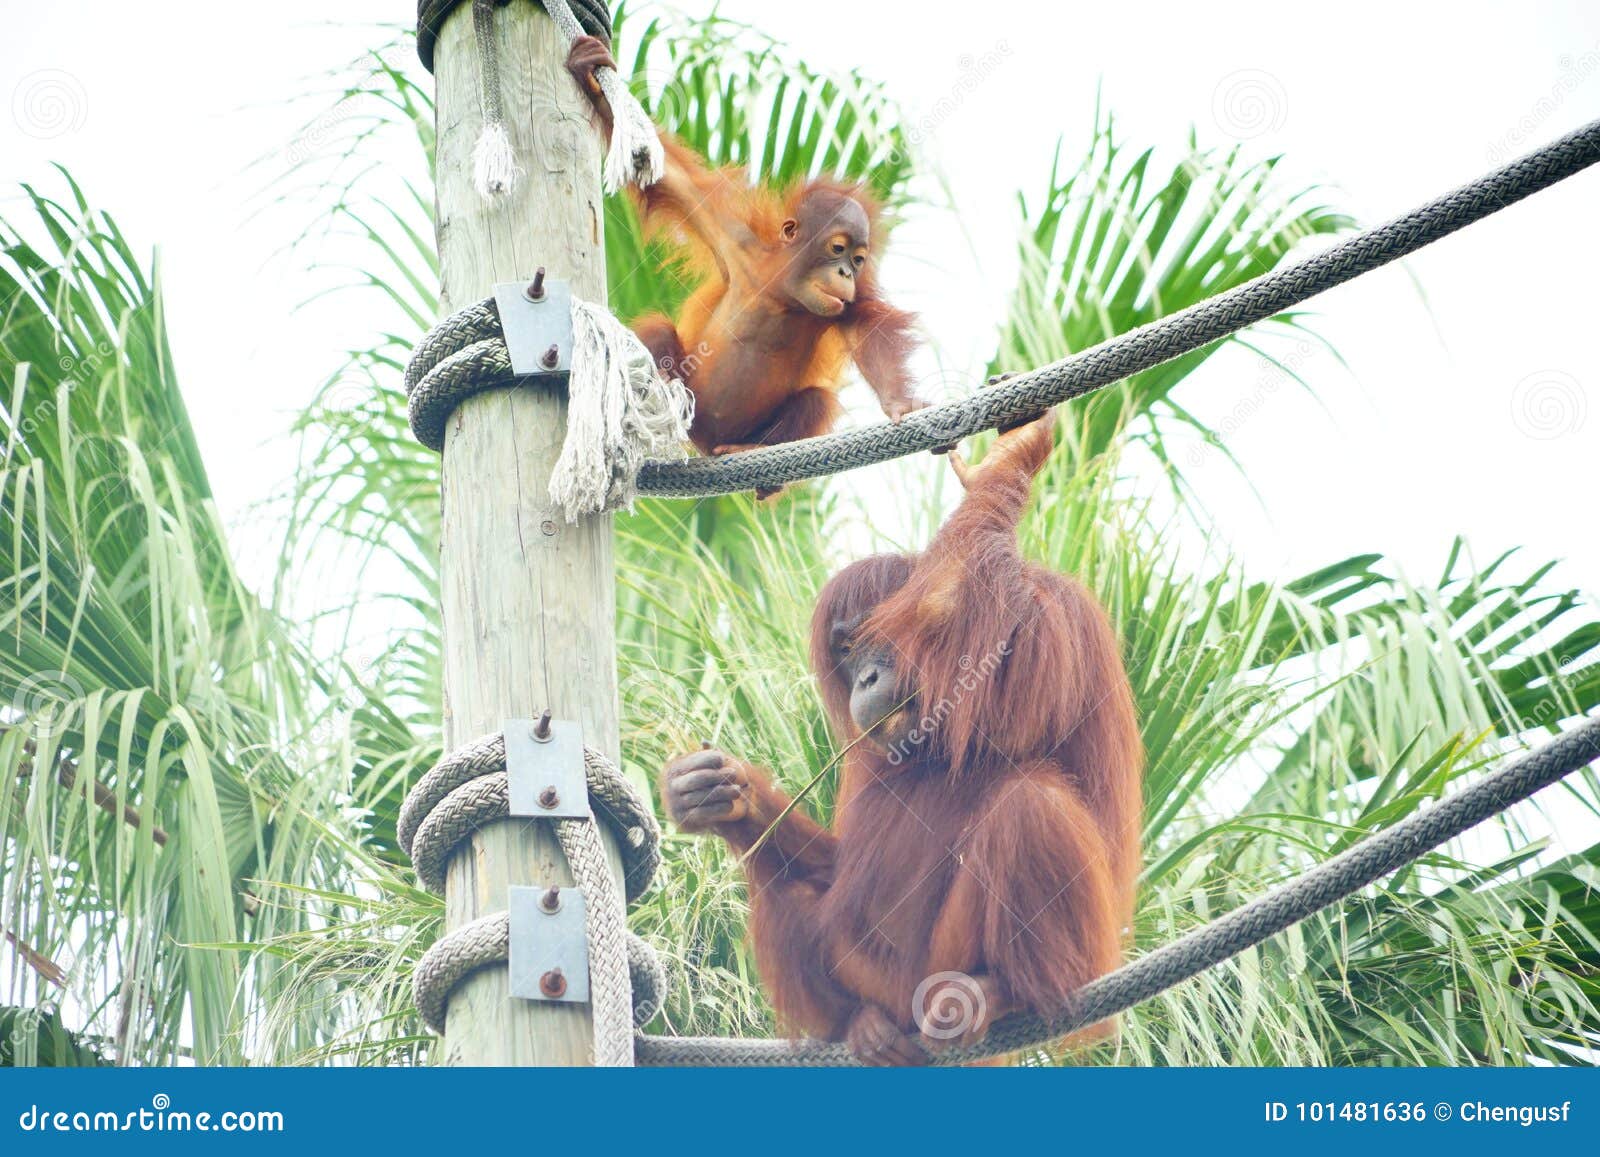 Download Mammal Orangutan Primate Ape And Her Baby Stock Photo - Image of background, brown: 101481636